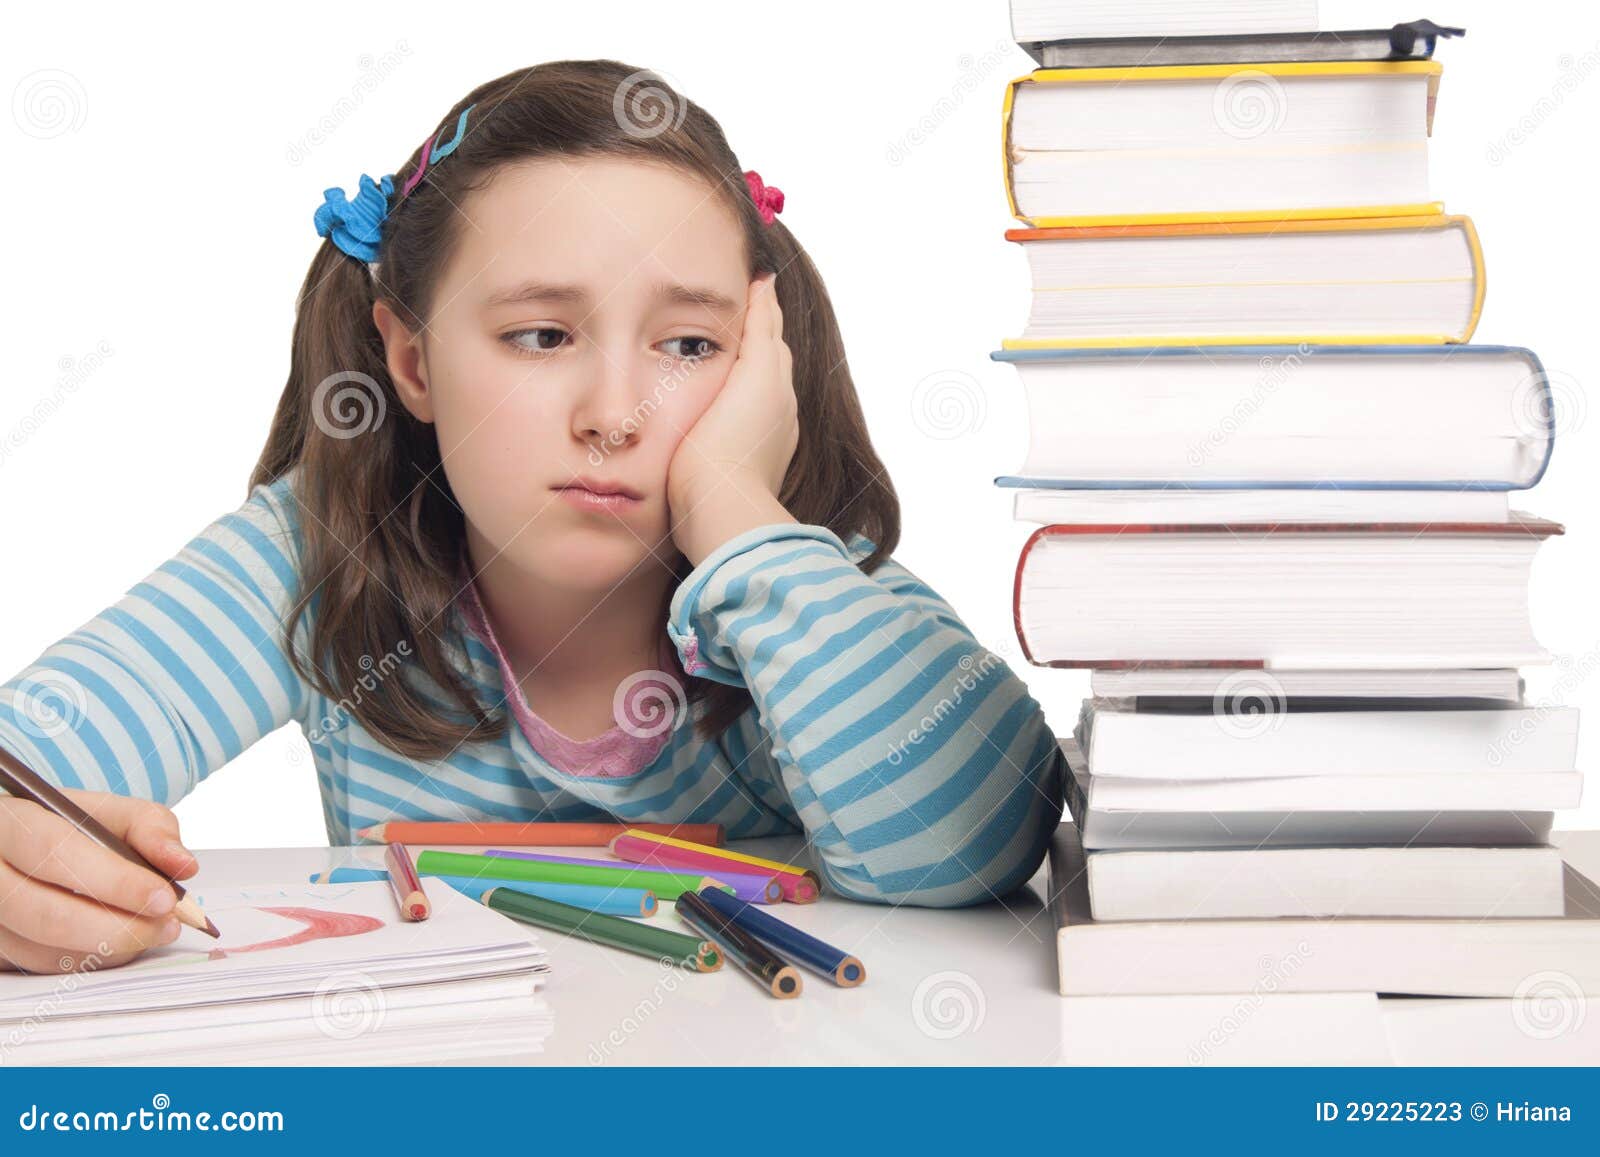 beautiful girl with color pencils and books worried